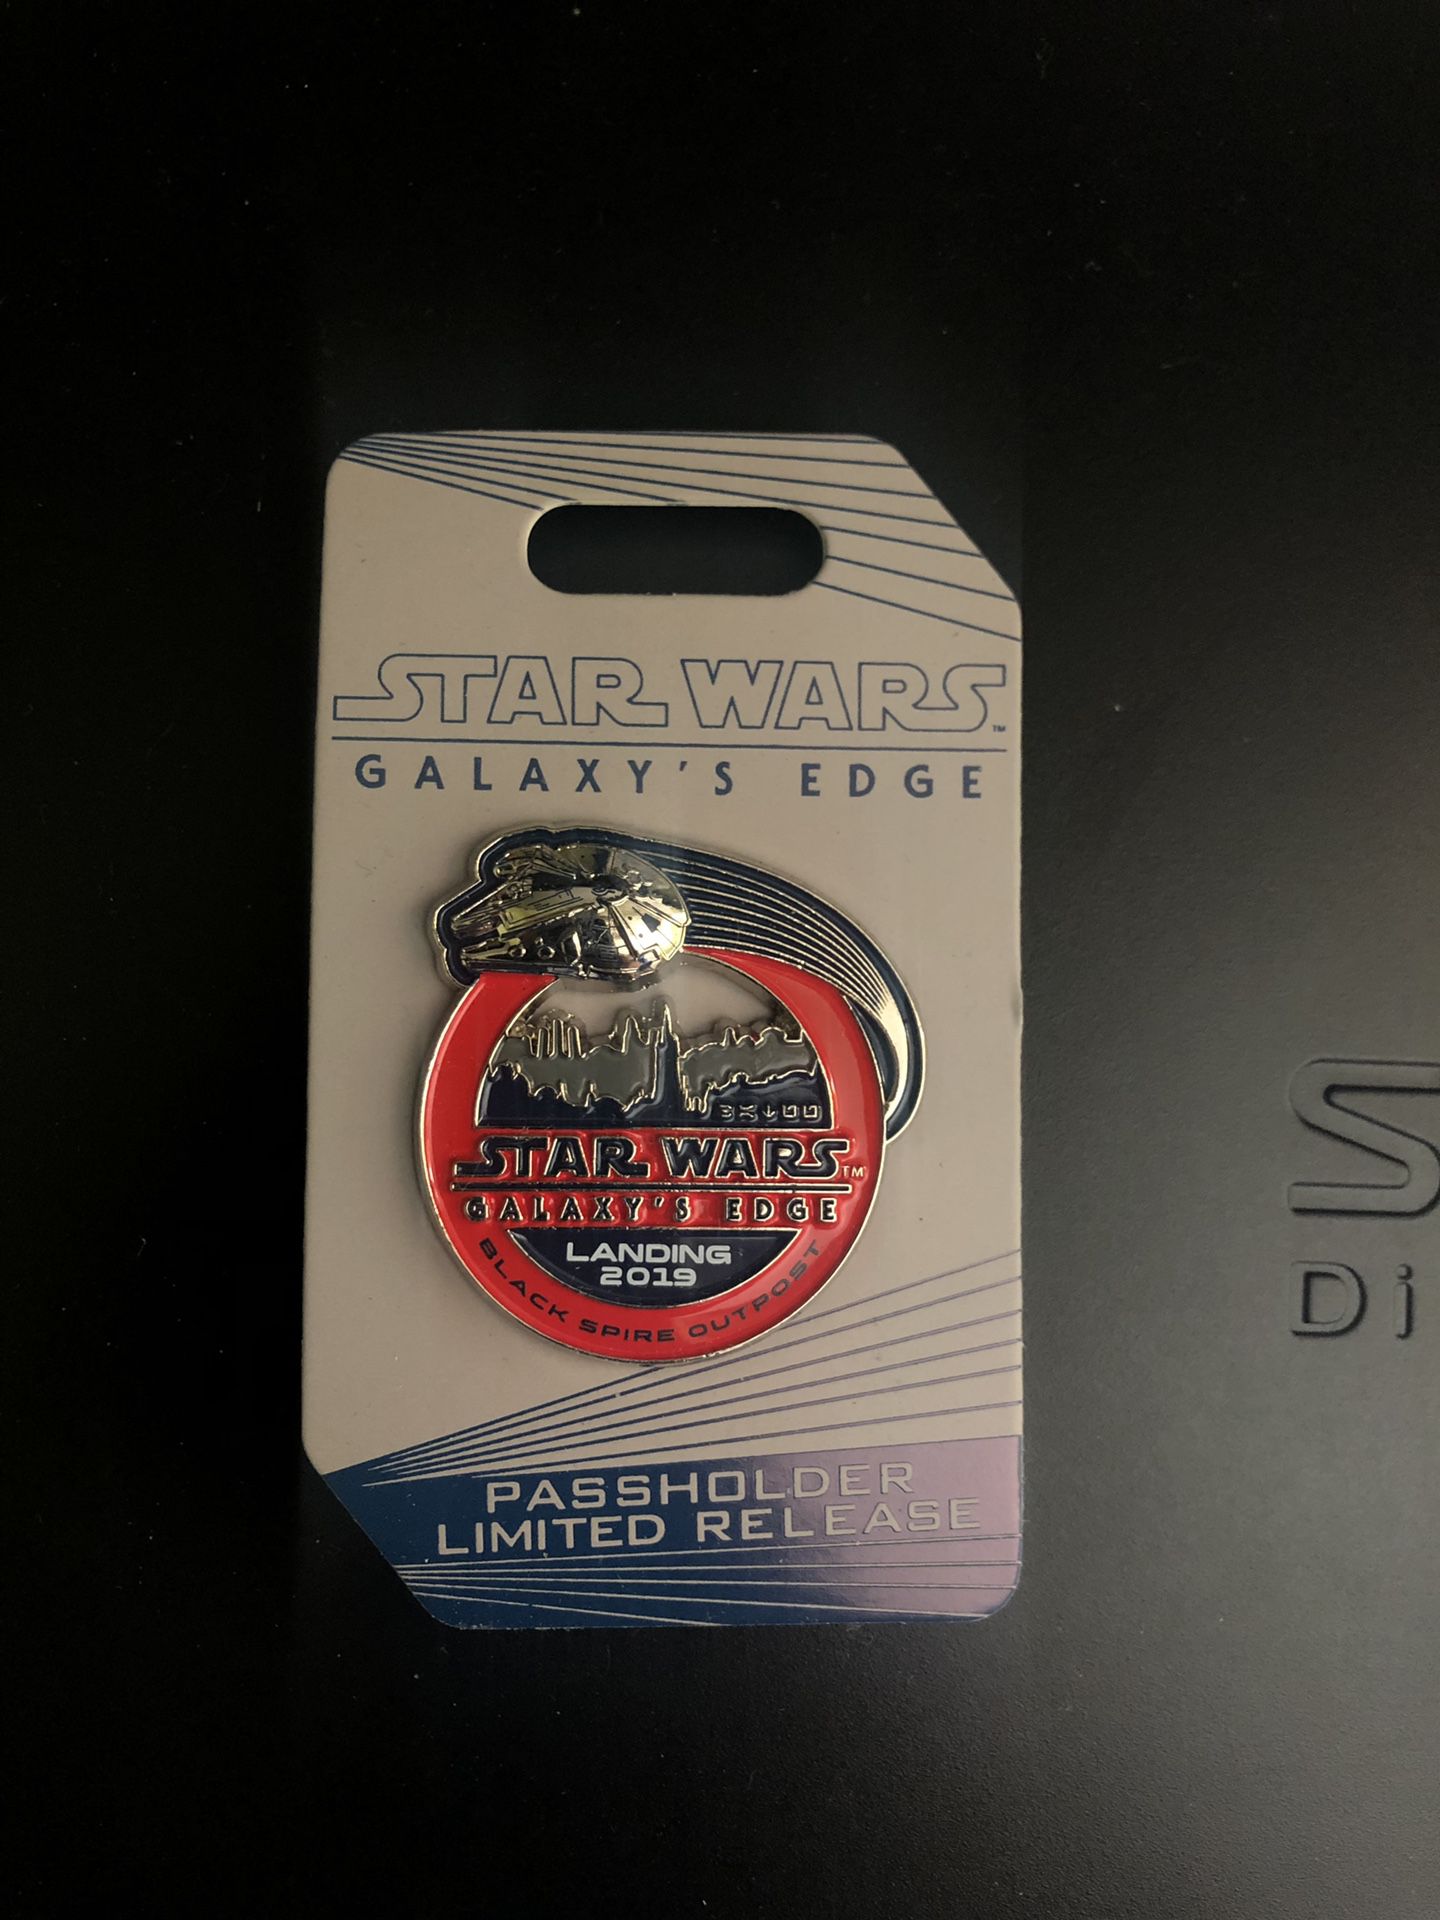 Disney’s Star Wars galaxys edge passholder limited release pin